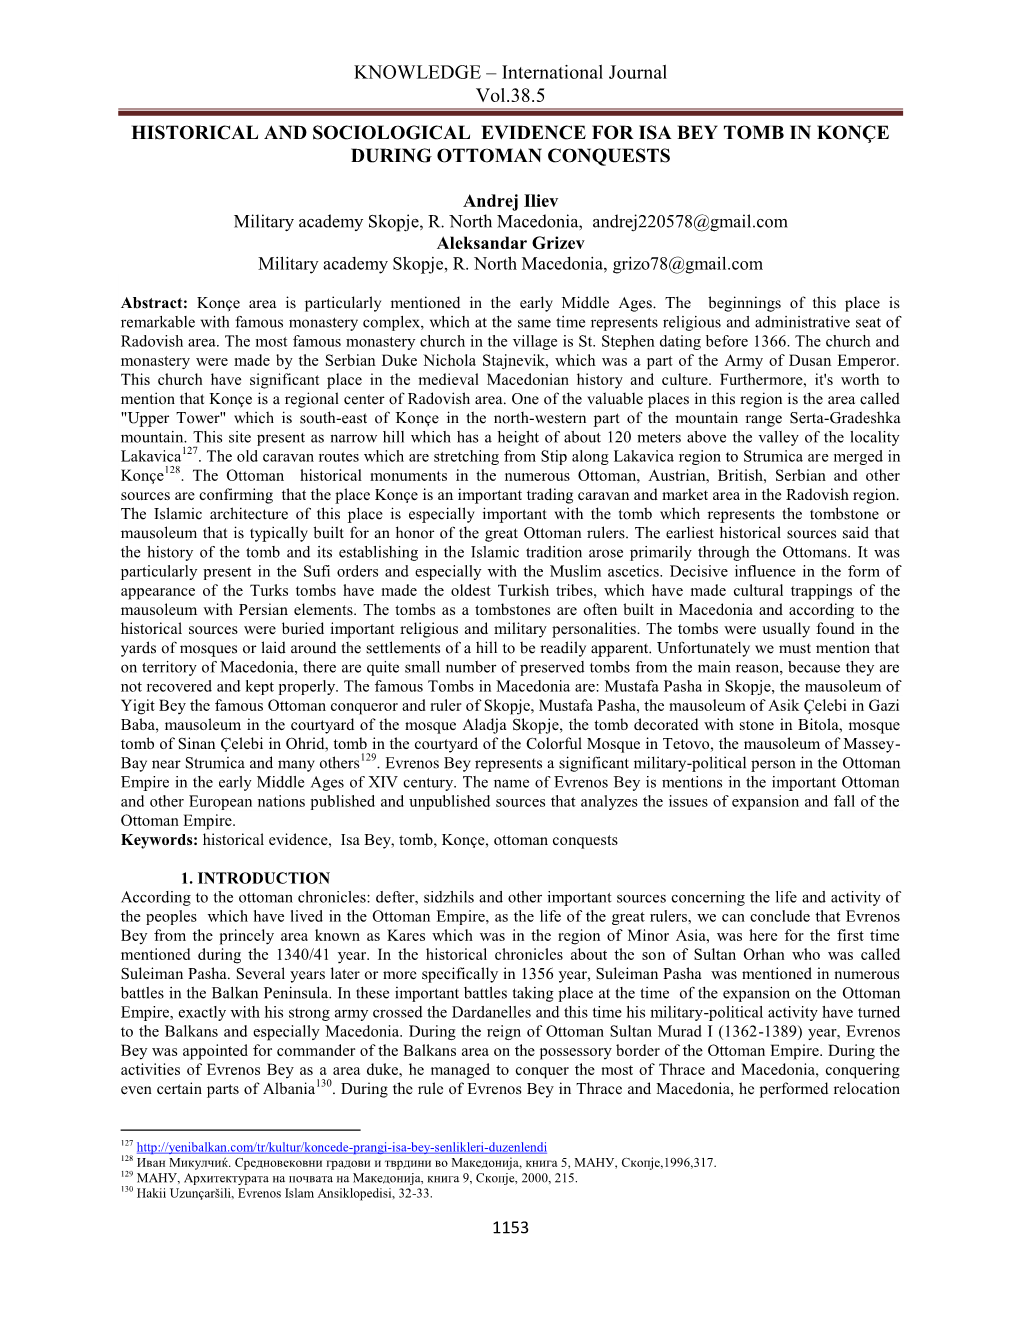 International Journal Vol.38.5 HISTORICAL and SOCIOLOGICAL EVIDENCE for ISA BEY TOMB in KONÇE DURING OTTOMAN CONQUESTS